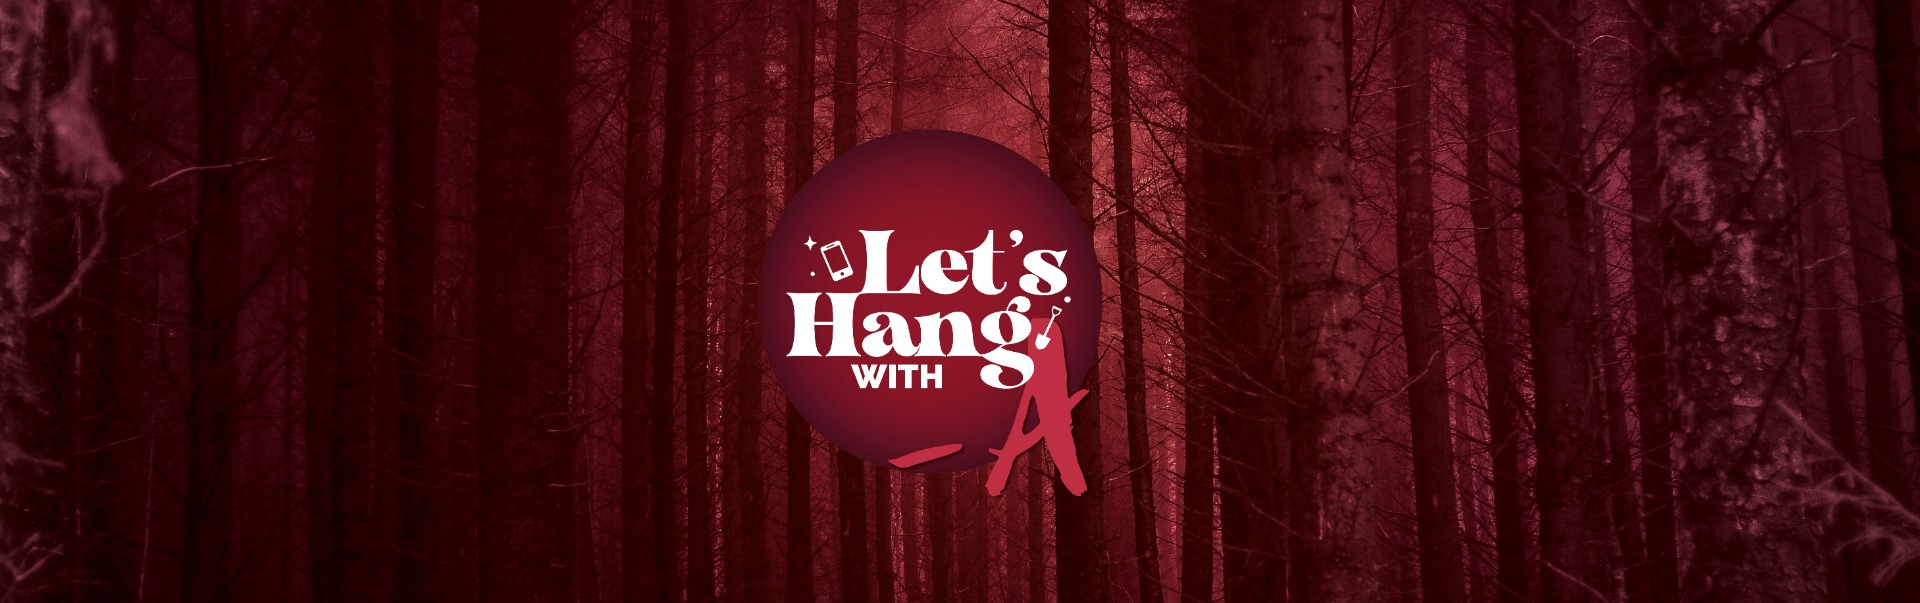 Let’s Hang With -A